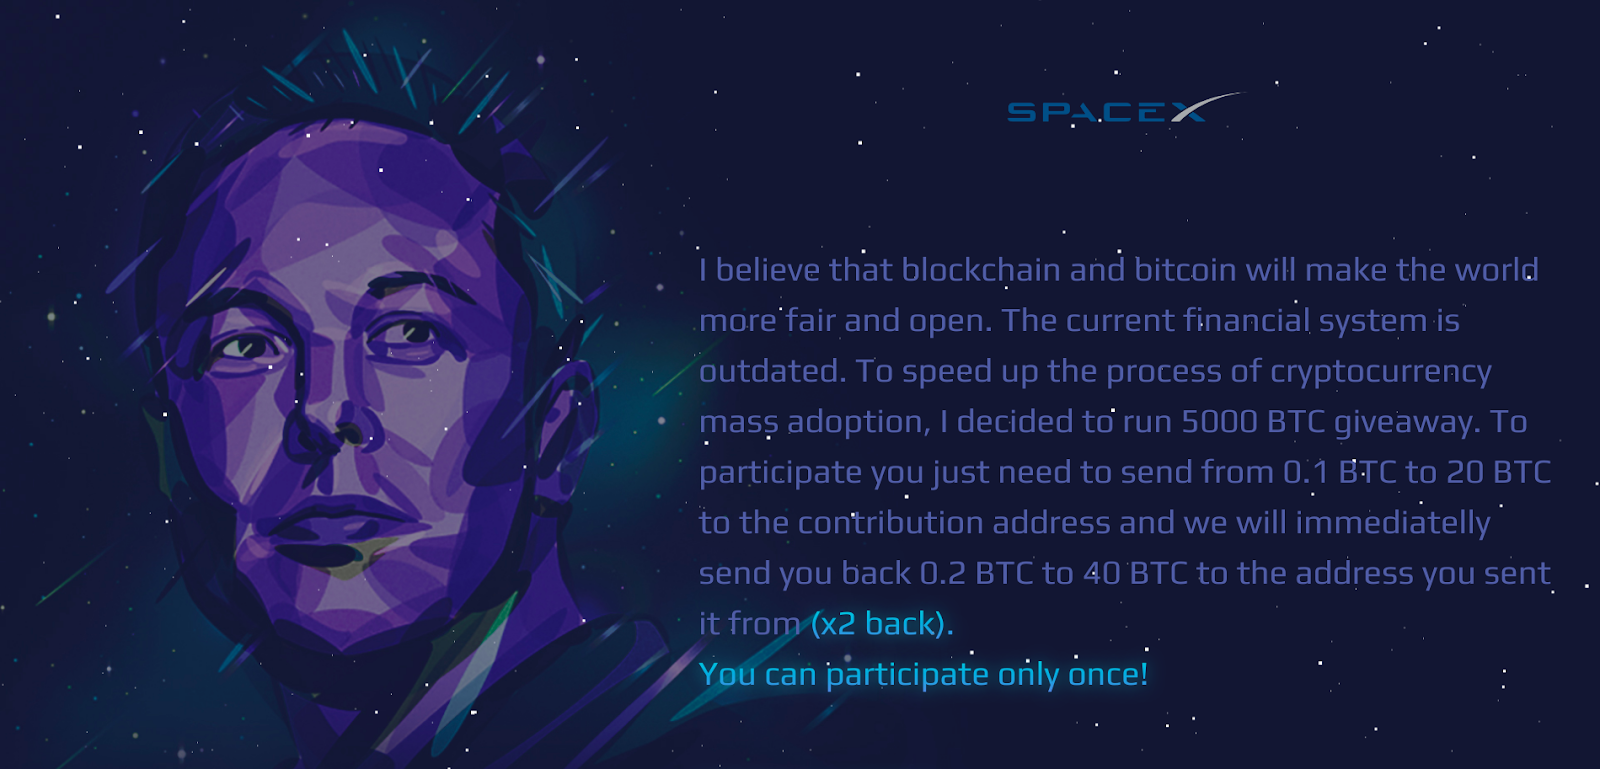 SpaceX Bitcoin Giveaway?